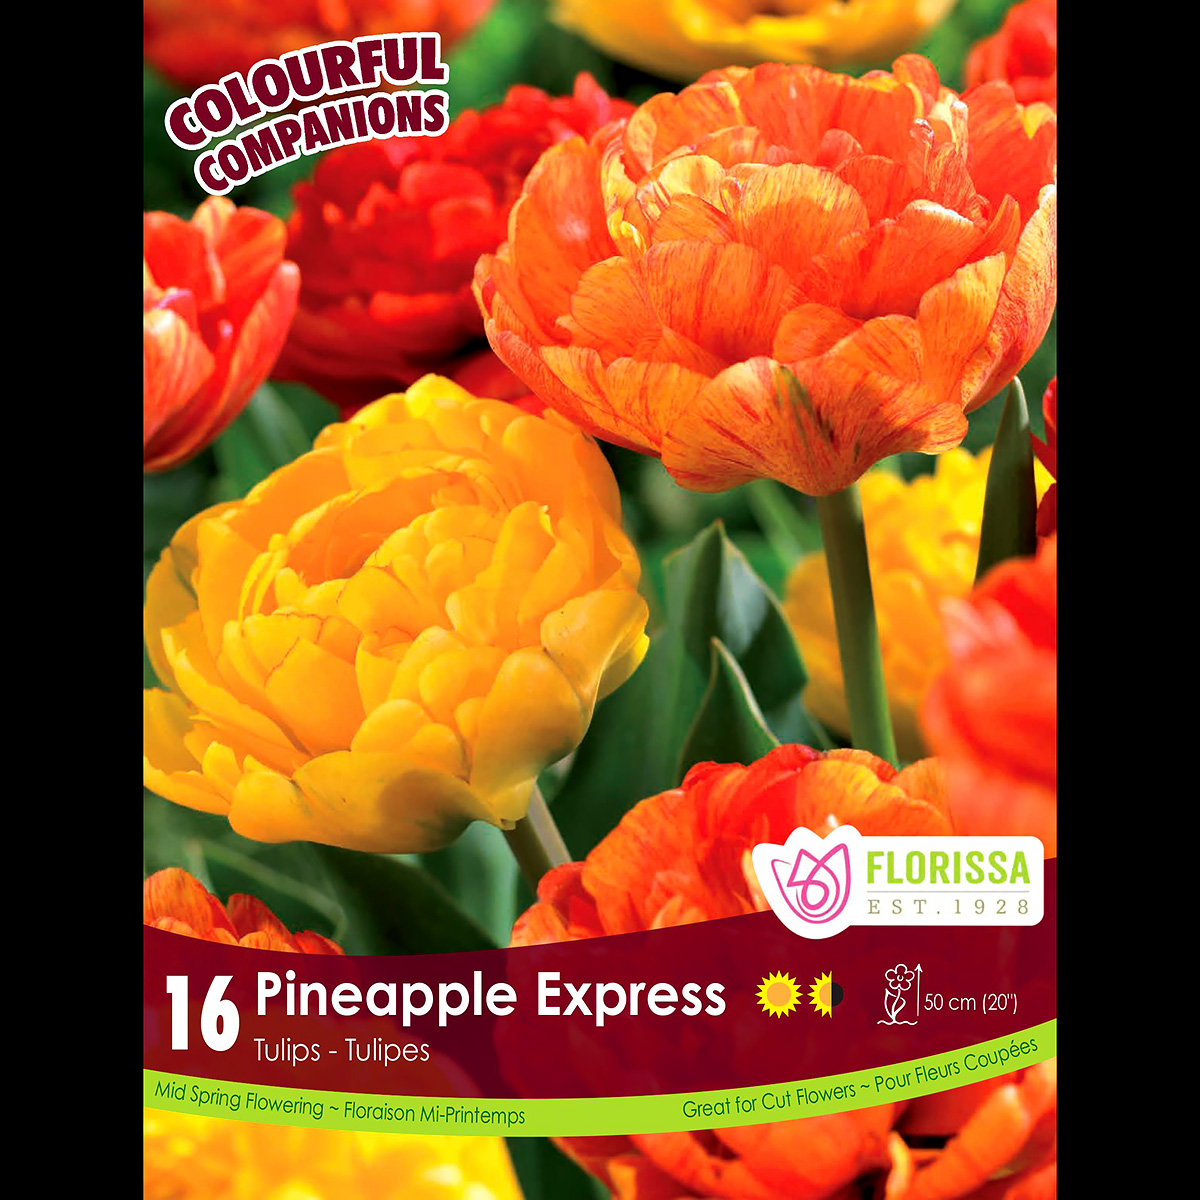 Colourful Companions 'Pineapple Express' Bulb Collection